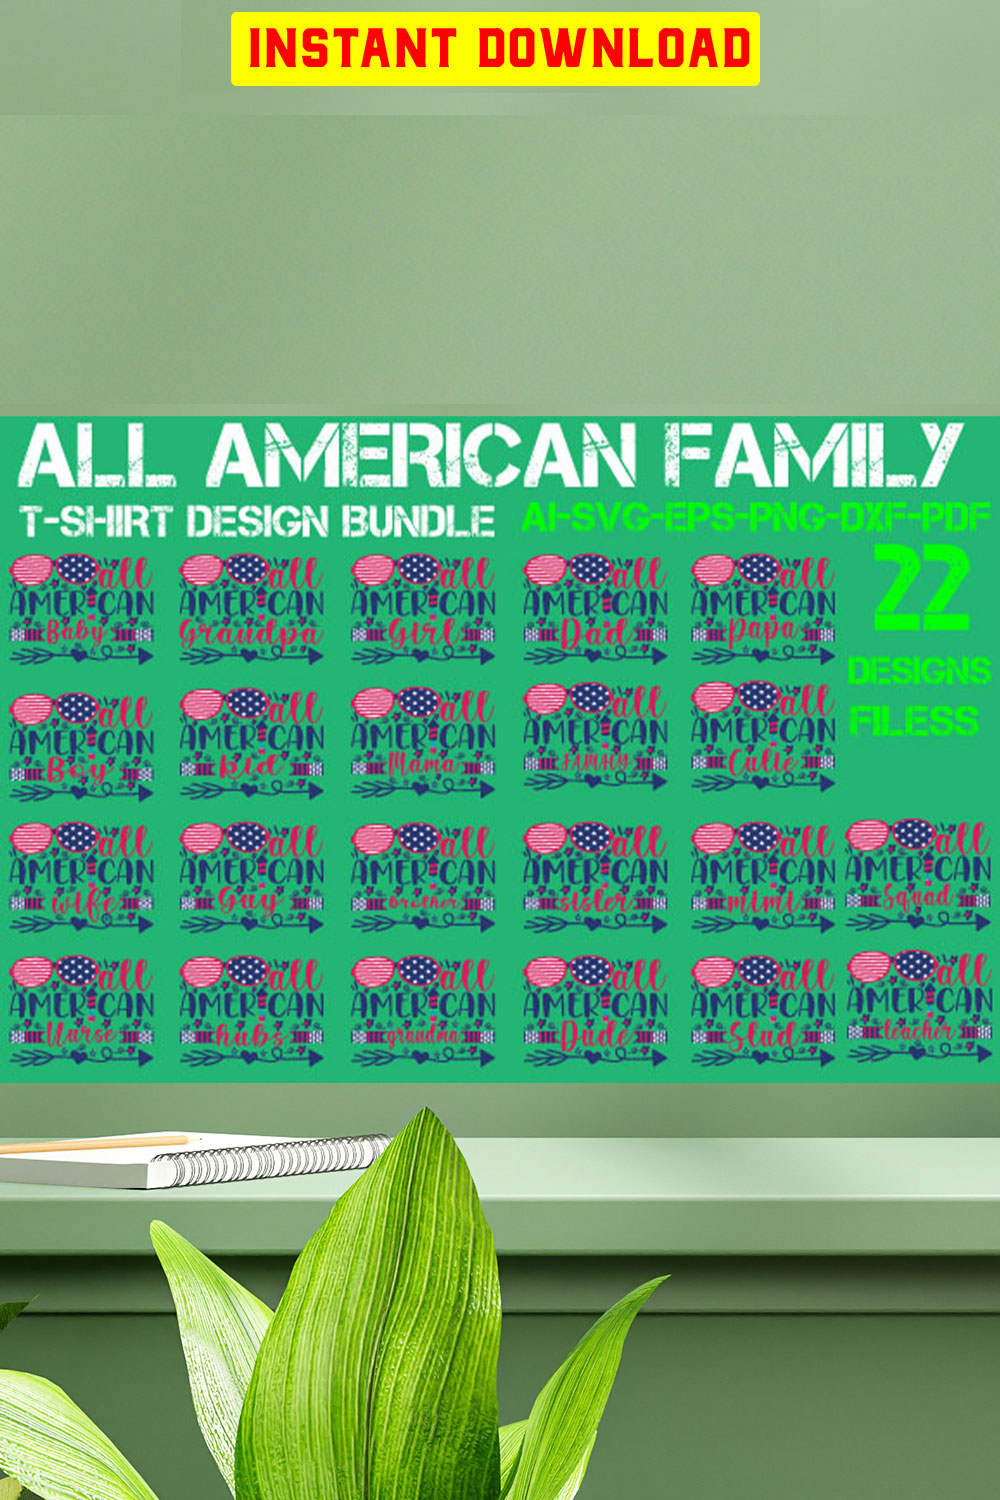 All American Family T-shirt Design Bundle pinterest preview image.